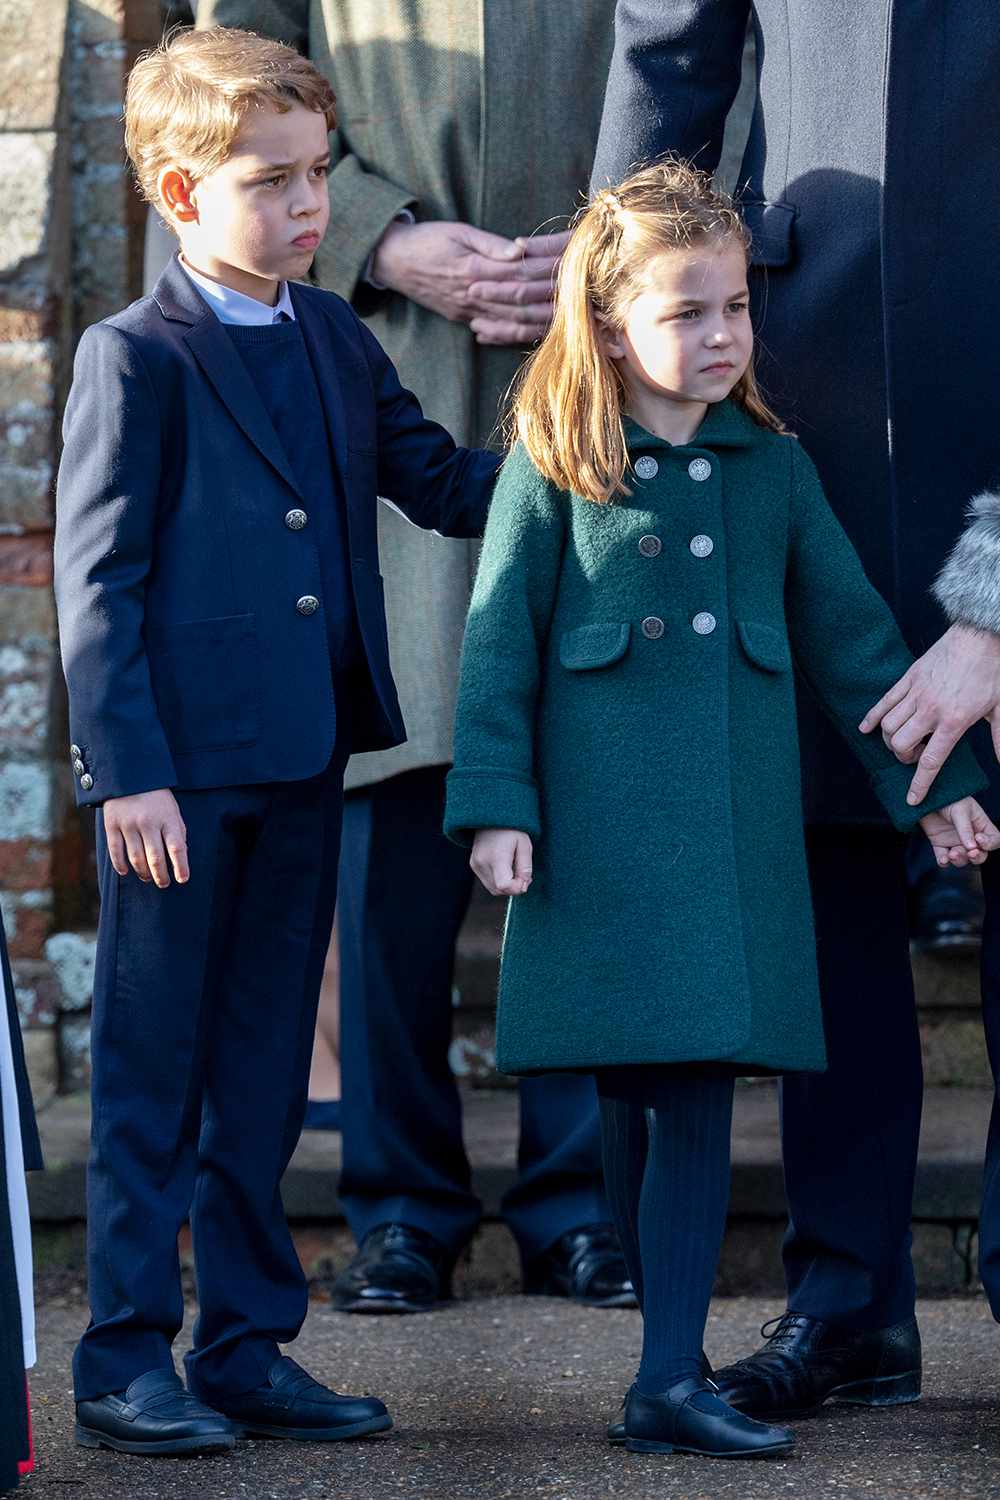 KING'S LYNN, ENGLAND - DECEMBER 25: Prince George of Cambridge and Princess Charlotte of Cambridge attend the Christmas Day Church service at Church of St Mary Magdalene on the Sandringham estate on December 25, 2019 in King's Lynn, United Kingdom. (Photo by Mark Cuthbert/UK Press via Getty Images)